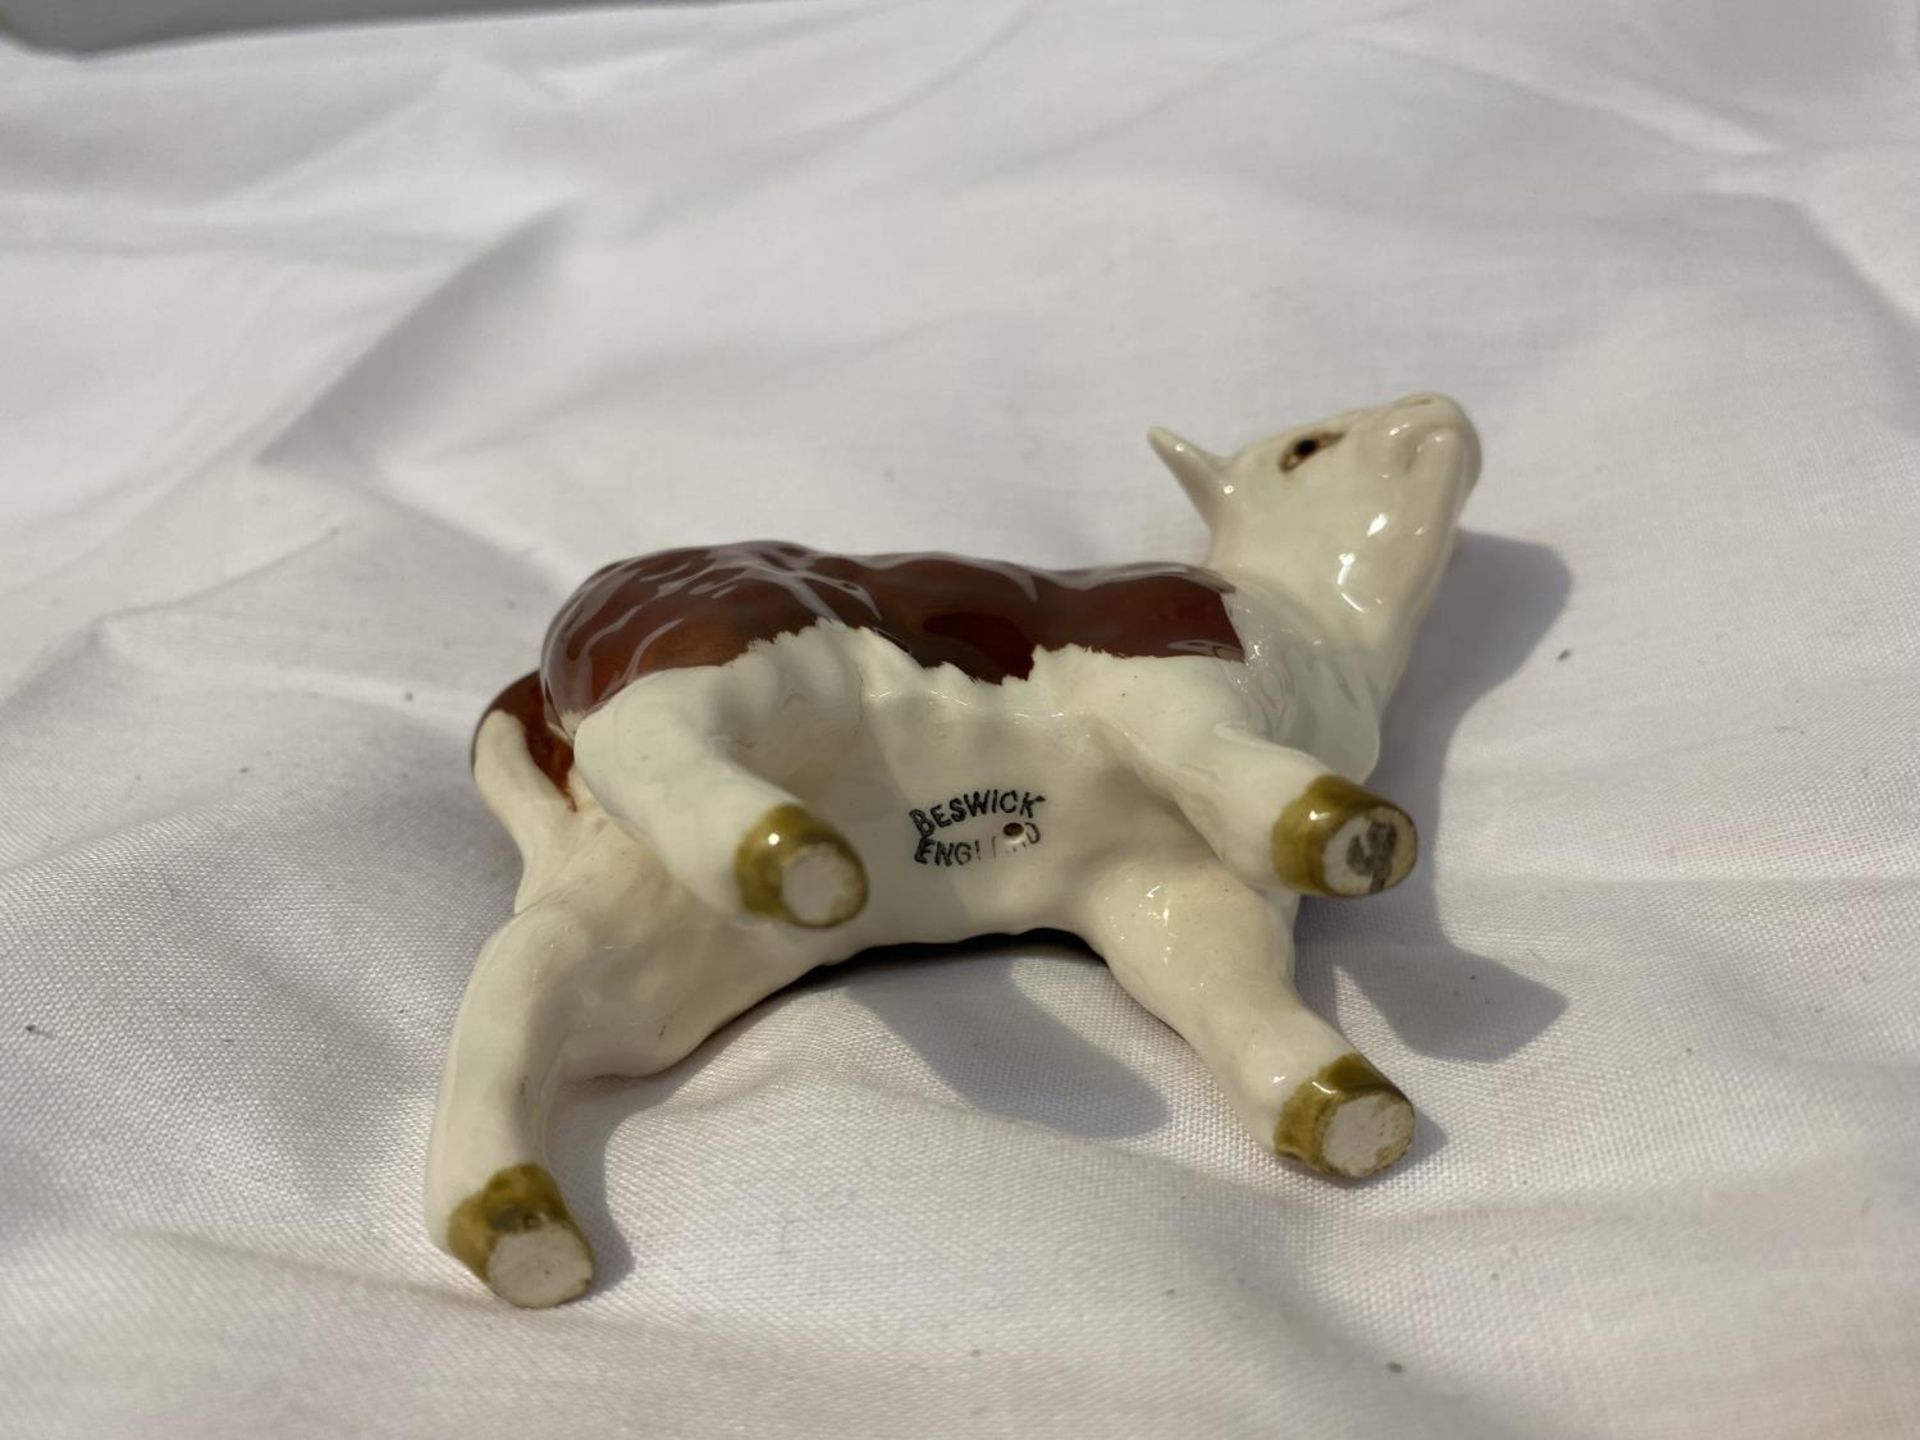 TWO BESWICK FIGURES, A HEREFORD COW AND A CALF - Image 8 of 8